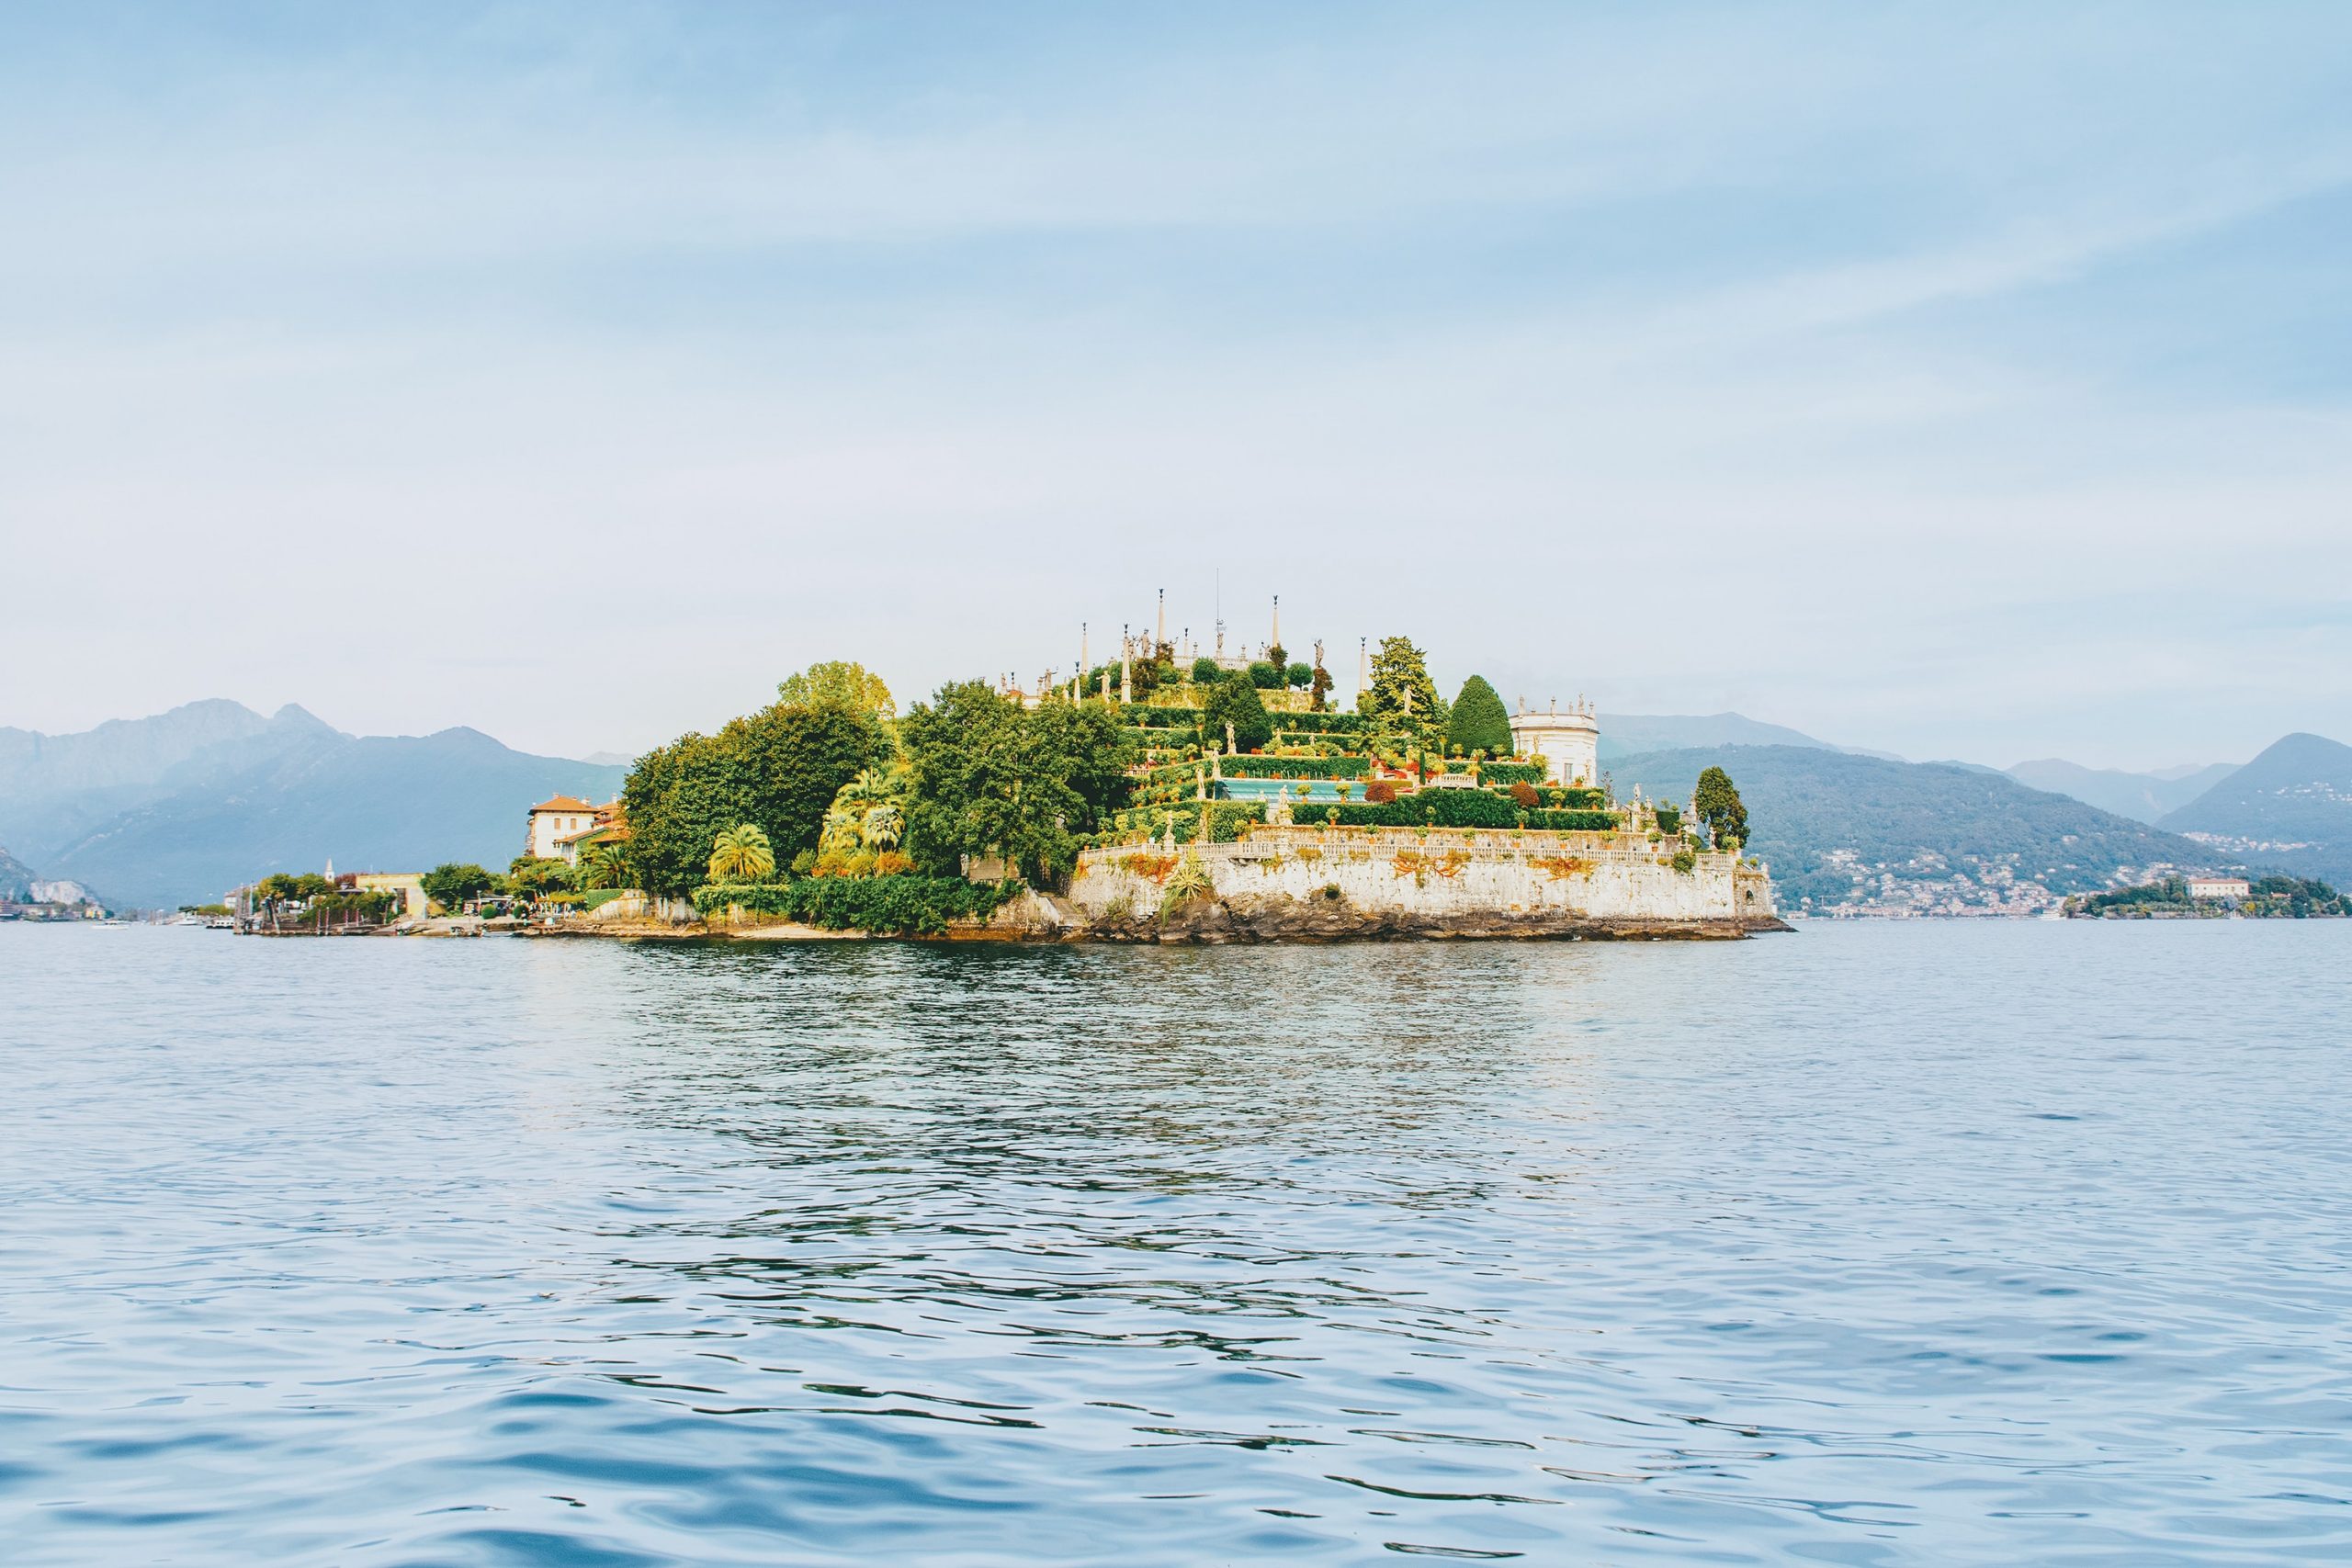 Gorgeous lake maggiore for day trips from Milan